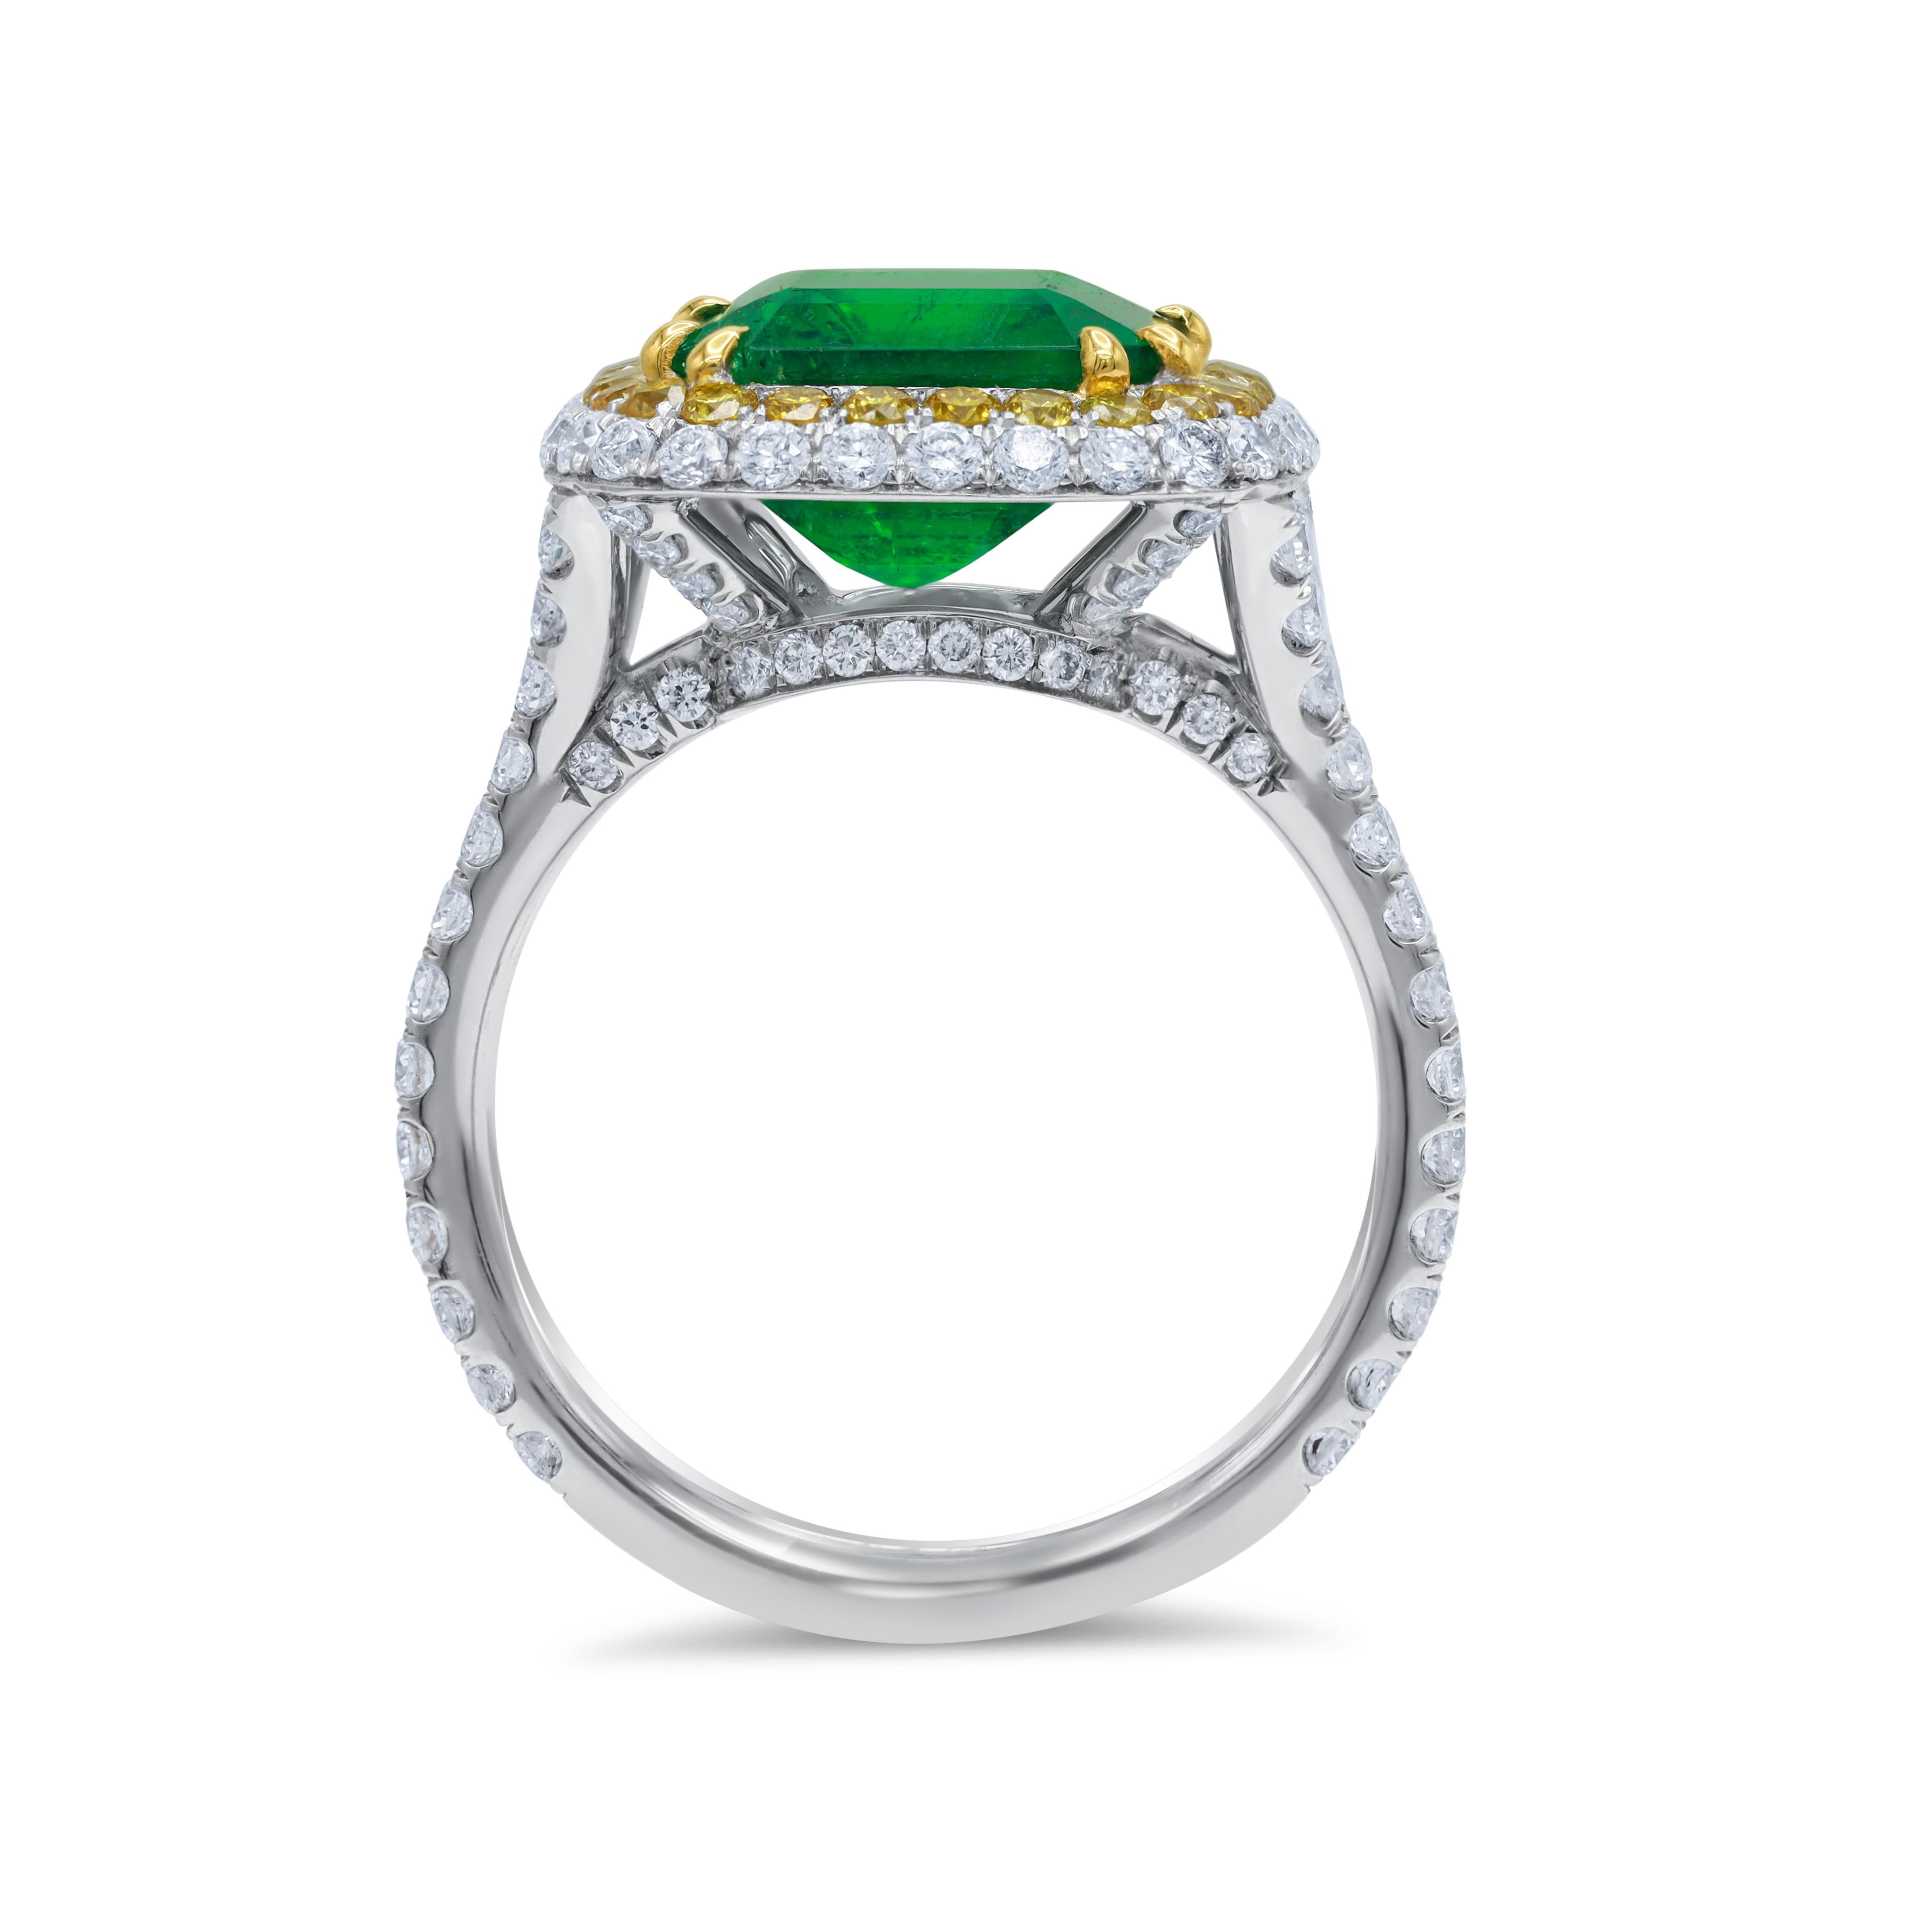 Diana M. 18kt White Gold Emerald Diamond Ring 3.97ct In New Condition For Sale In New York, NY